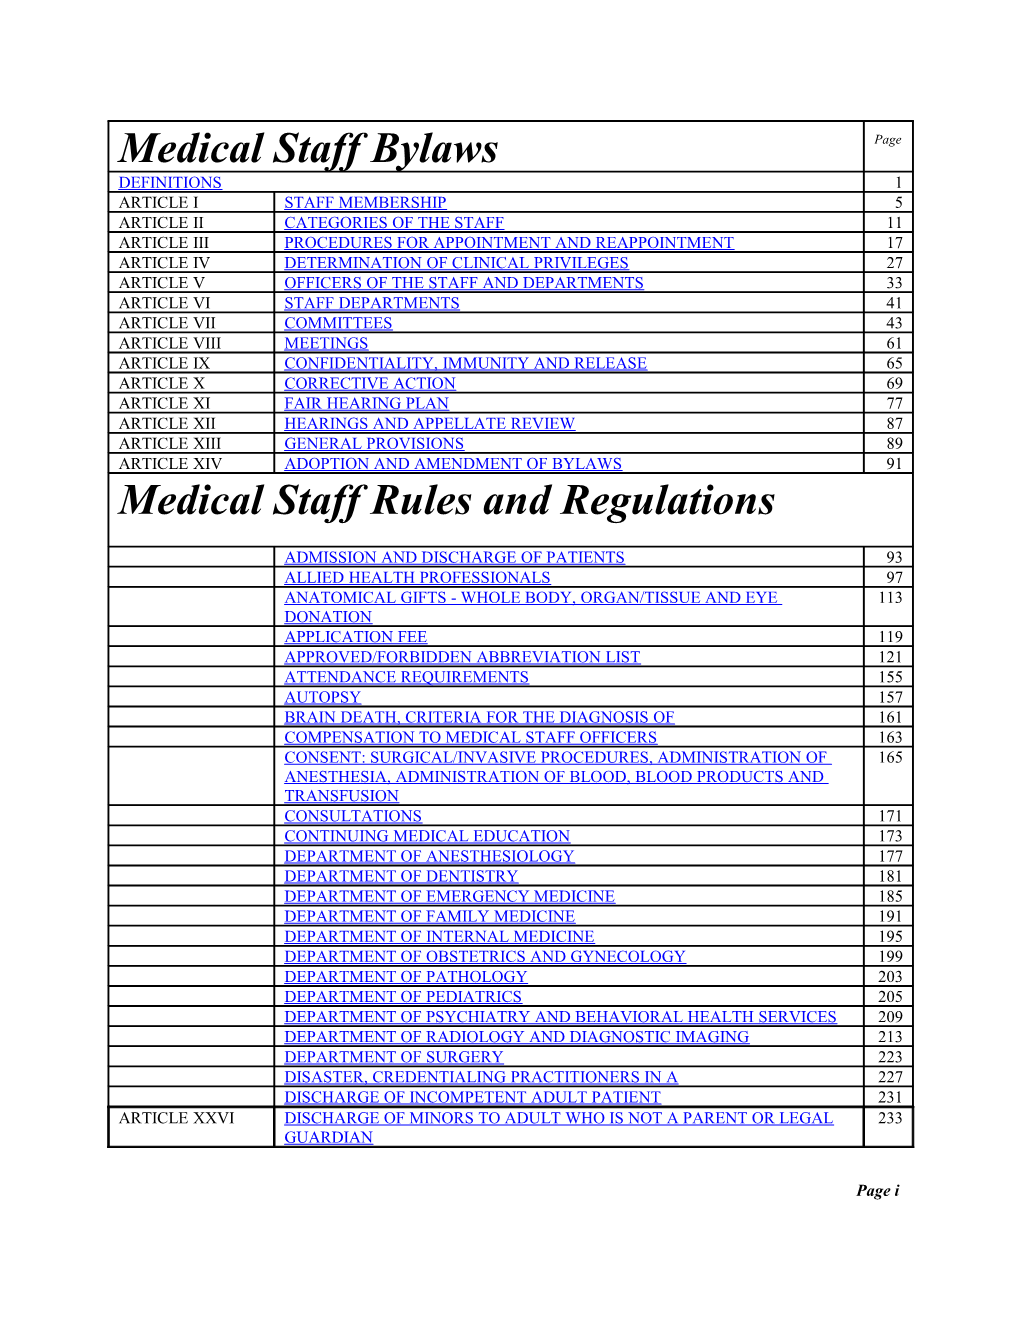 Medical Staff Bylaws - Table of Contents